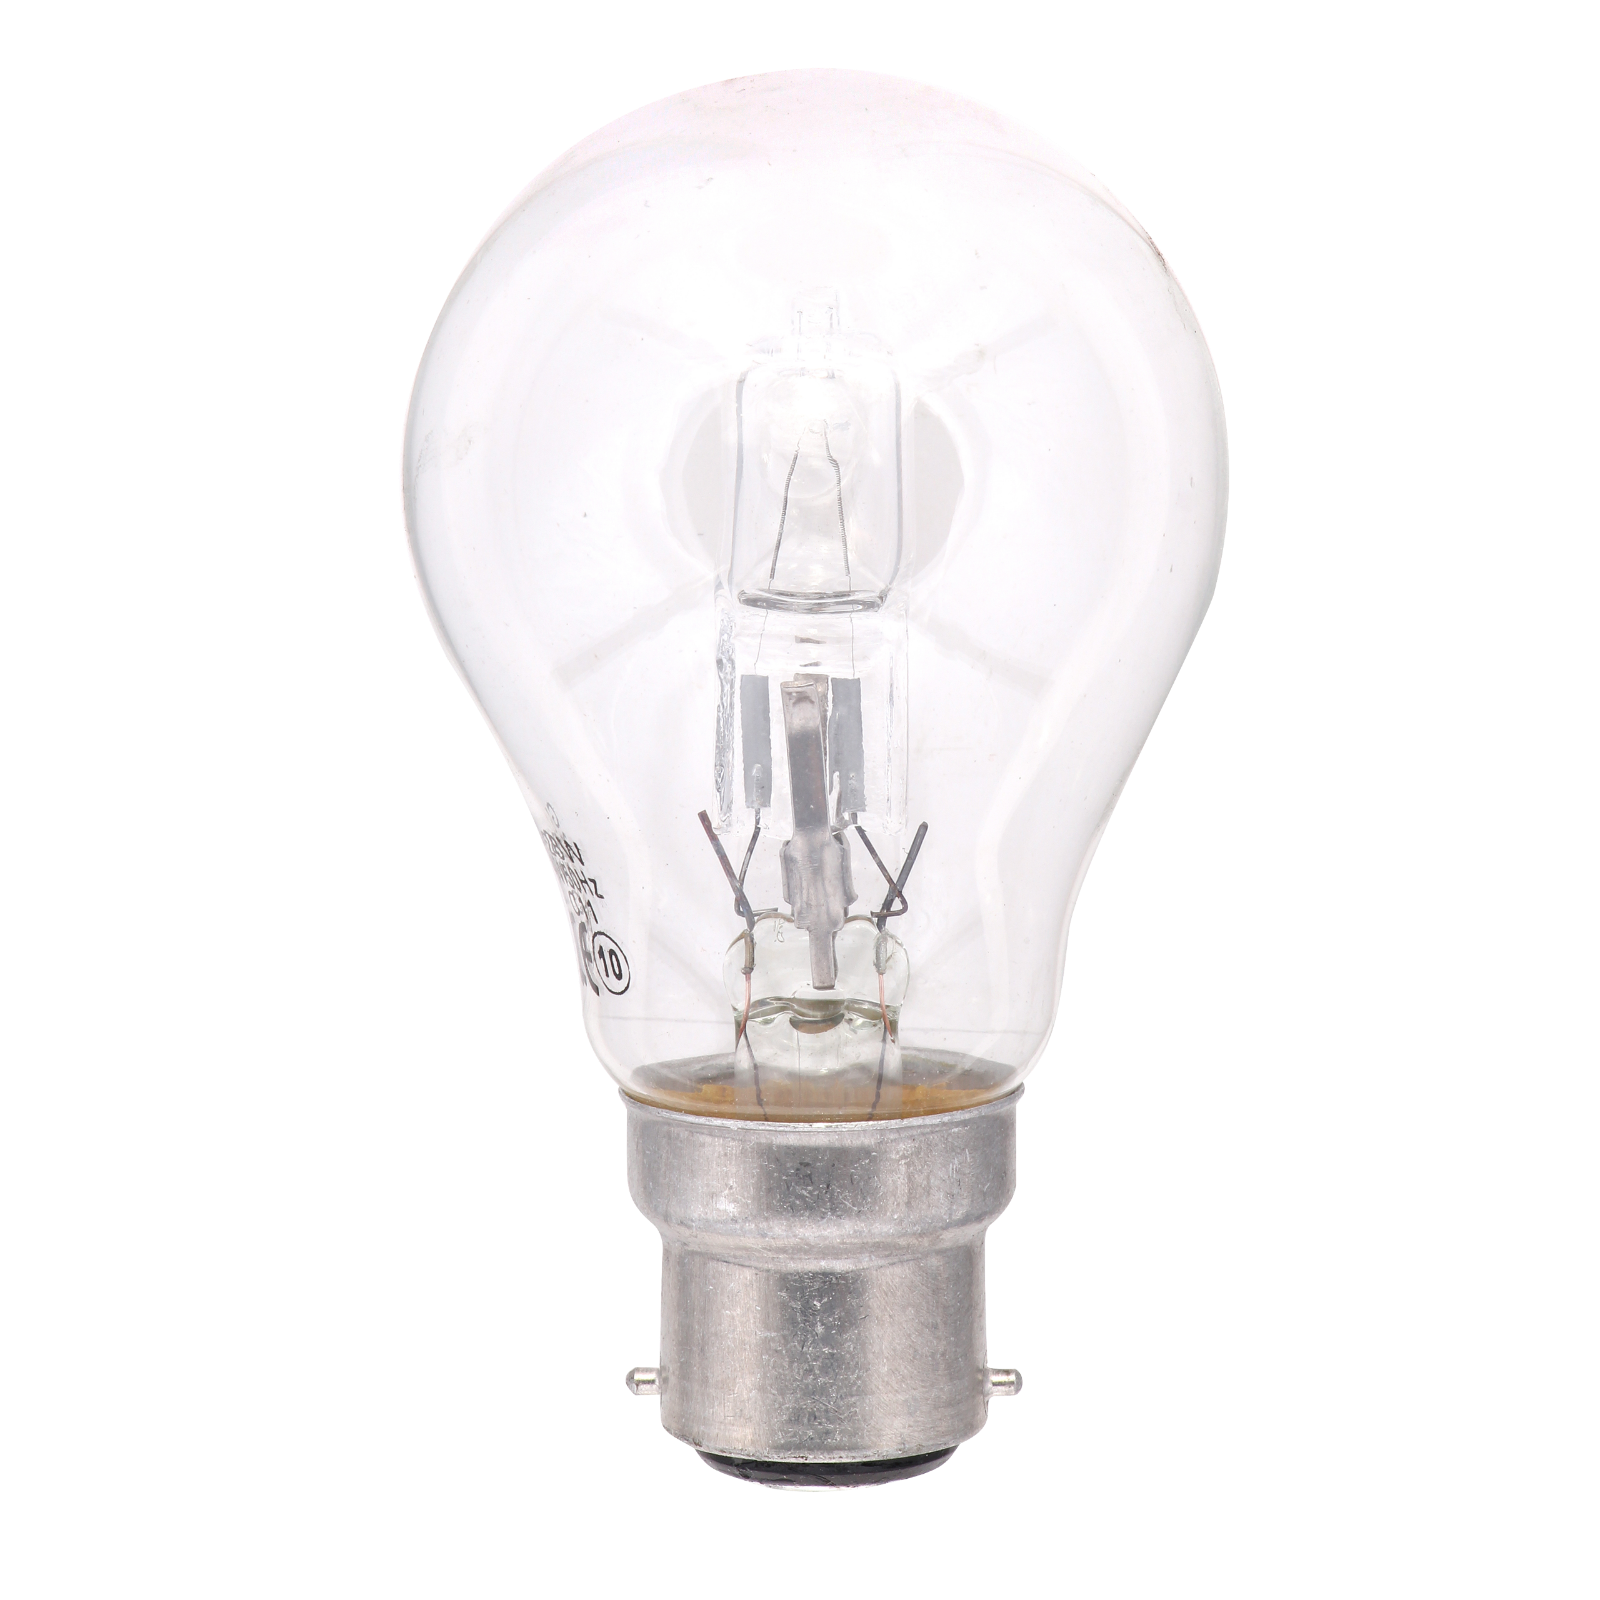 70W Halogen Energy Saving Clear GLS Lamp BC (equivalent To 100W) - HALO-G70BC - SOLD-OUT!! 